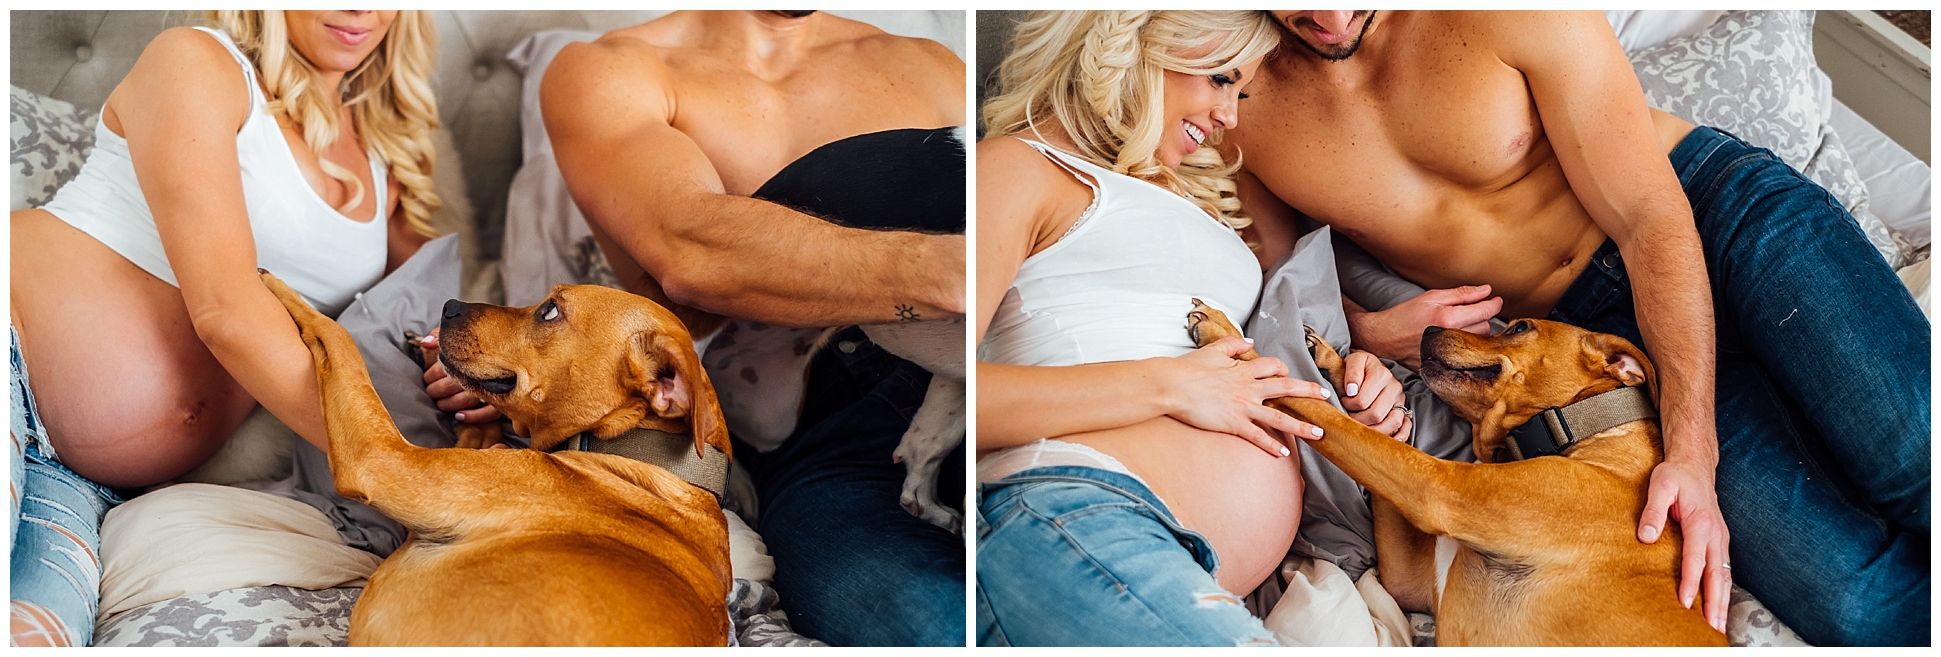 tampa-playful-at home-maternity-boudoir-dogs_0053.jpg